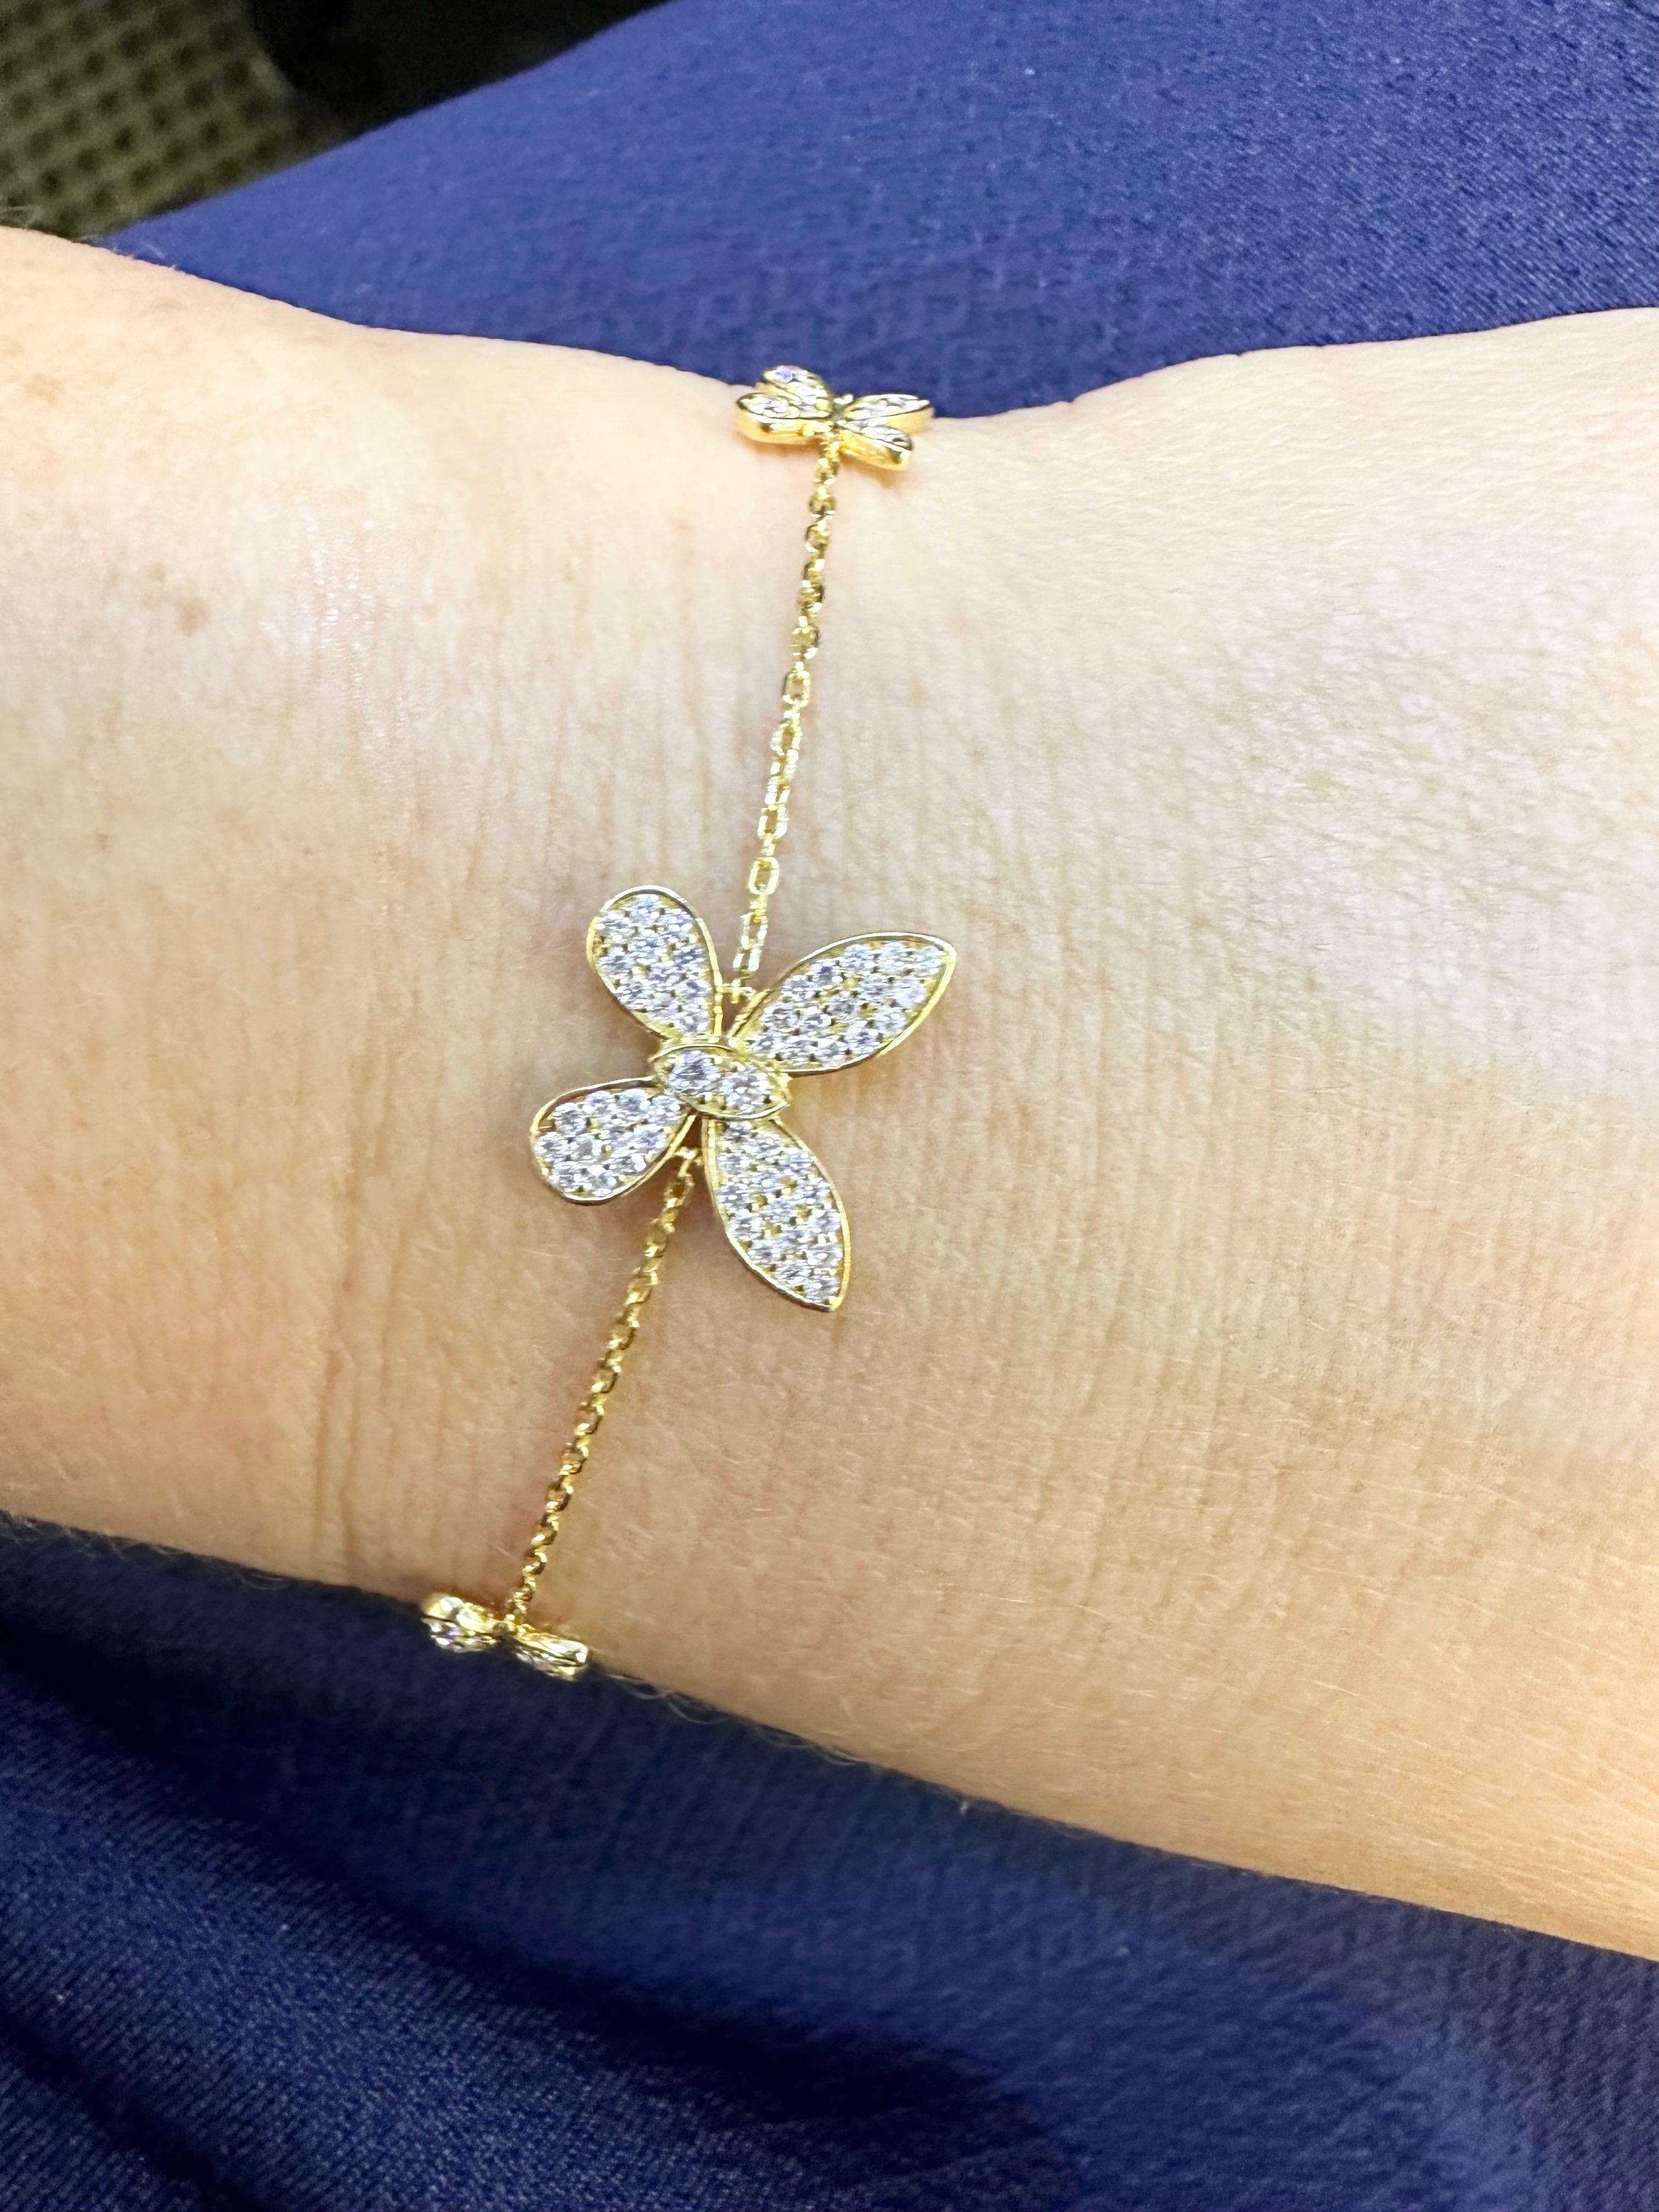 14KT yellow gold diamond bracelet with butterflies, excellent craftsmanship with 0.60 carats of diamonds Si clarity and G color!
Certificate of authenticity comes with purchase!

ABOUT US
We are a family-owned business. Our studio in located in the